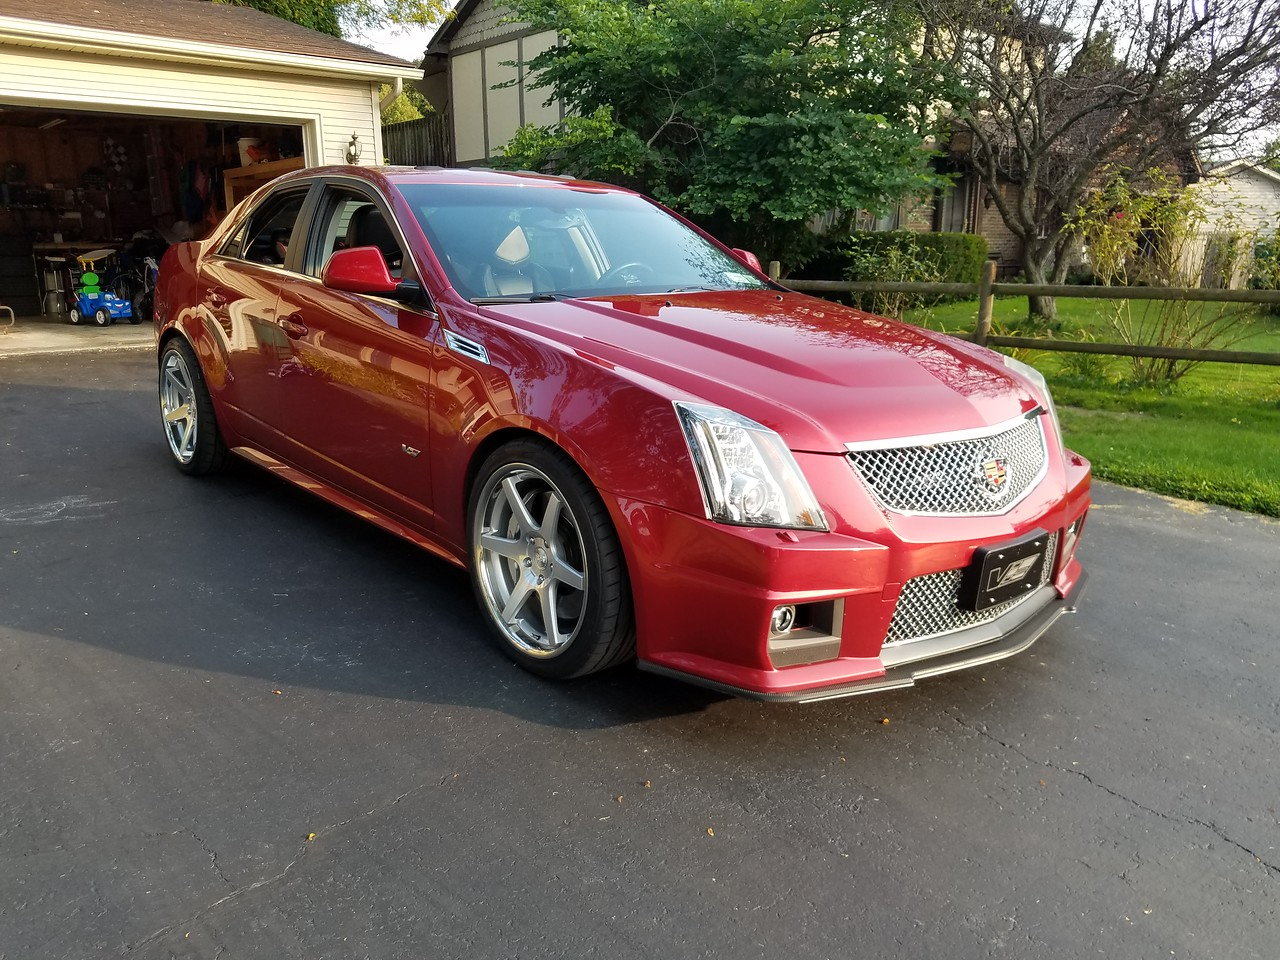 2009 Cadillac CTS-V - 2009 Crystal Red CTS-V A6 Sedan Recaro/Pano - 67k miles - modded - $30k obo - Used - VIN 1G6DN57P890166320 - 67,000 Miles - 8 cyl - 2WD - Automatic - Sedan - Red - Rochester, NY 14612, United States